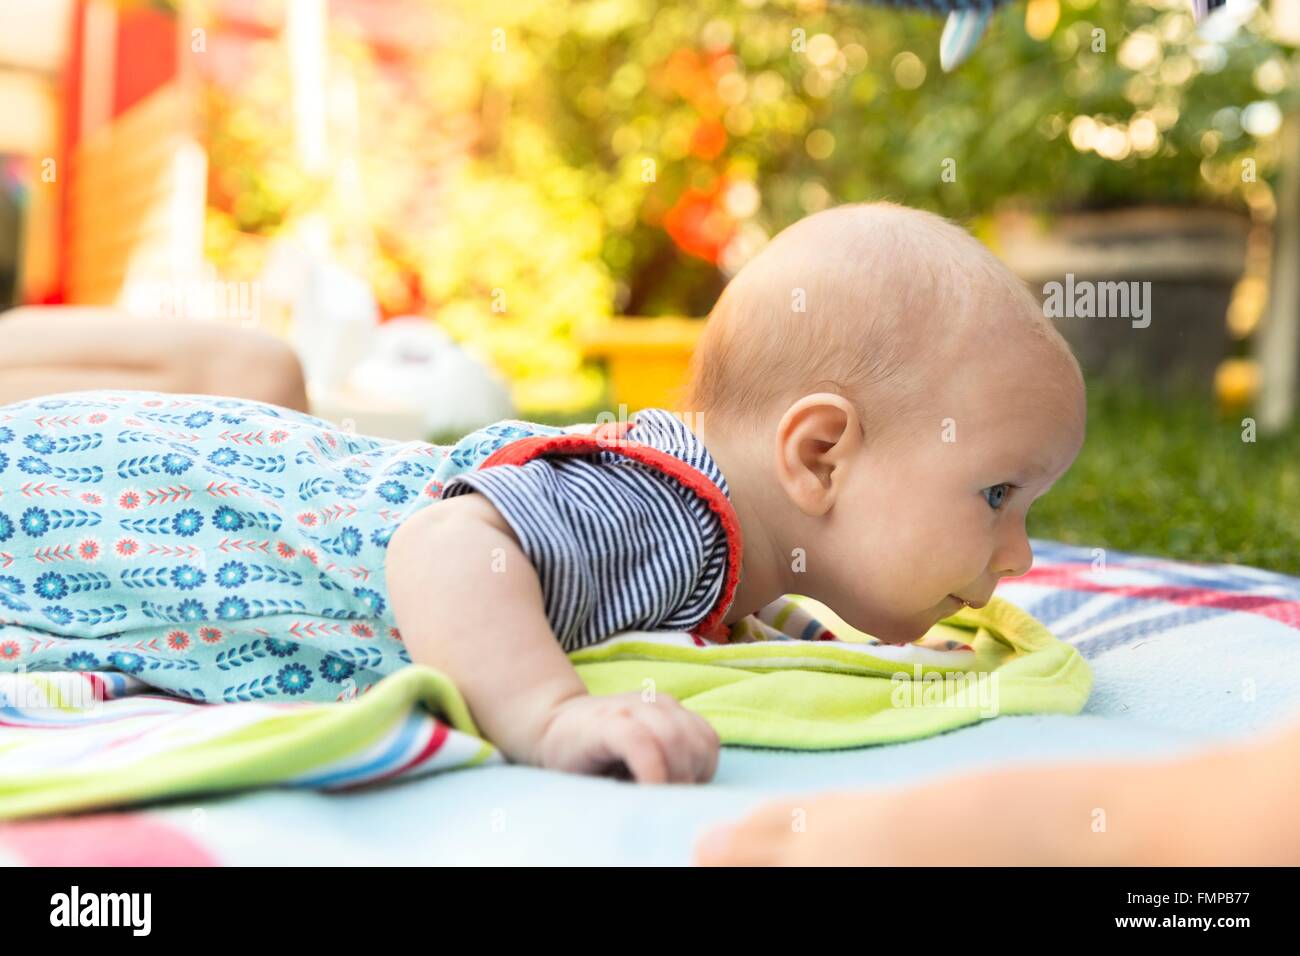 Baby lying on its stomach or tummy on a blanket Stock Photo